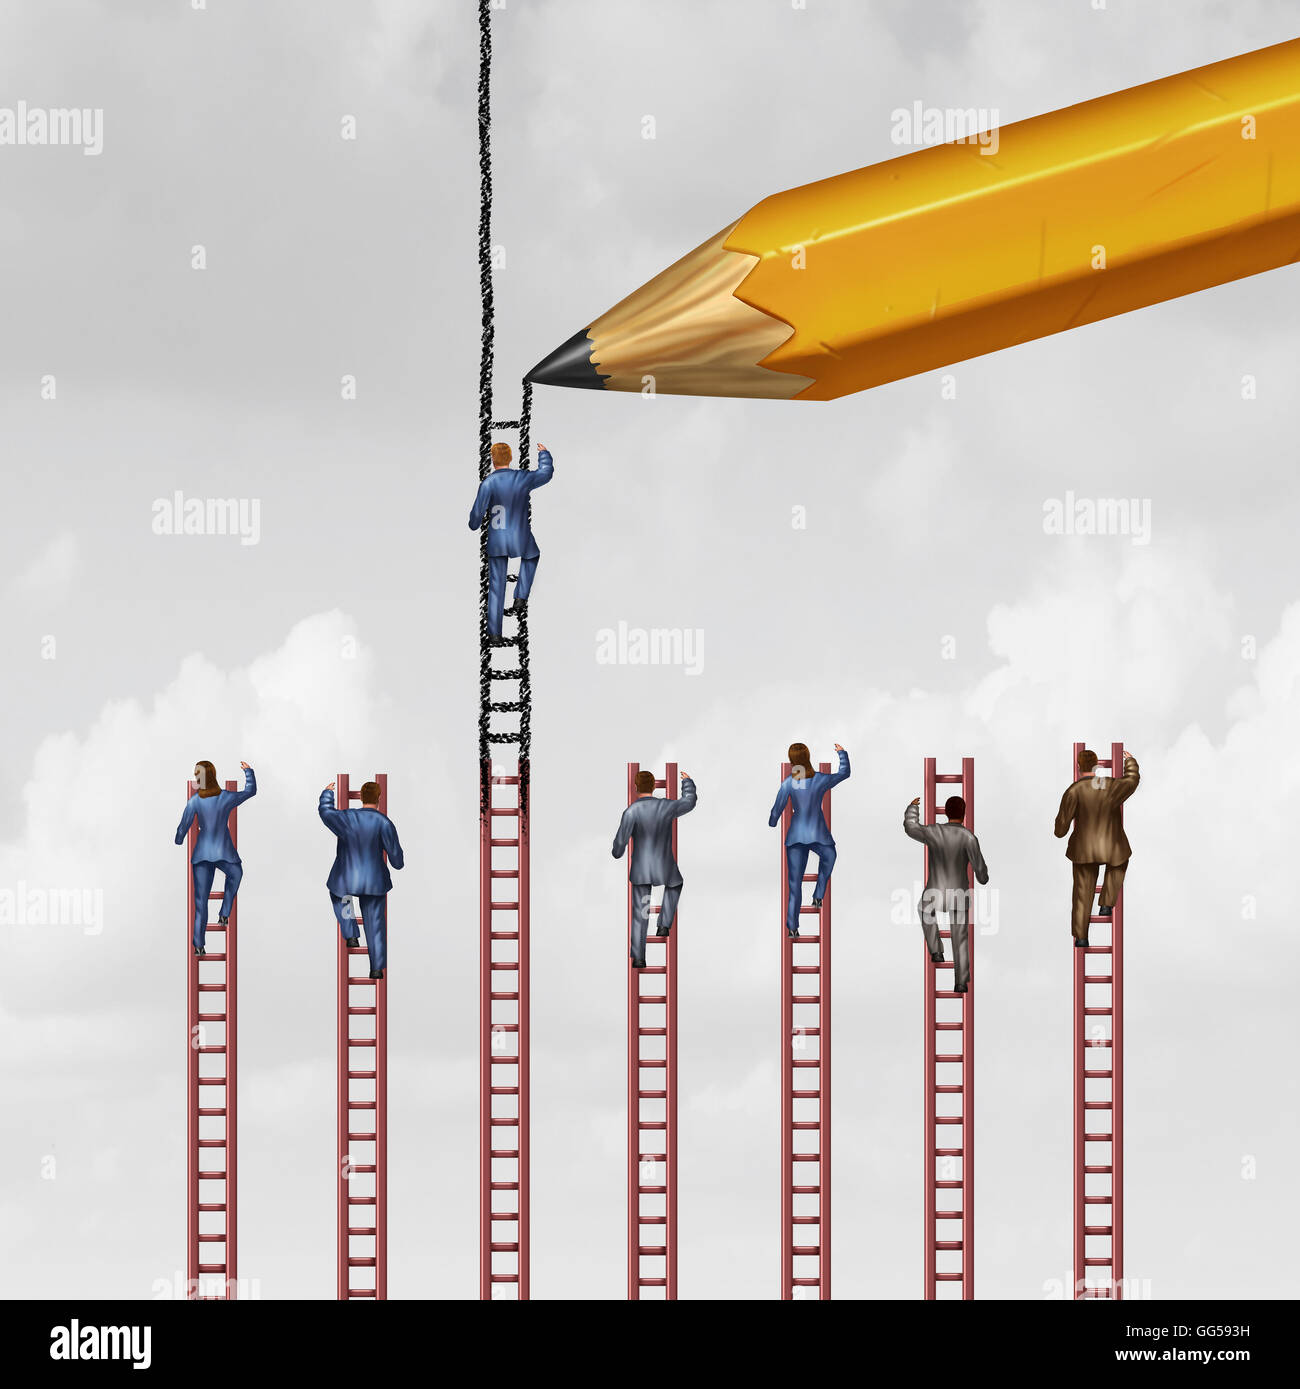 Career advice concept and business success support symbol as a group of businessmen and businesswomen climbing limited ladders but one individual that is helped by a pencil extending opportunity with 3D illustration elements. Stock Photo